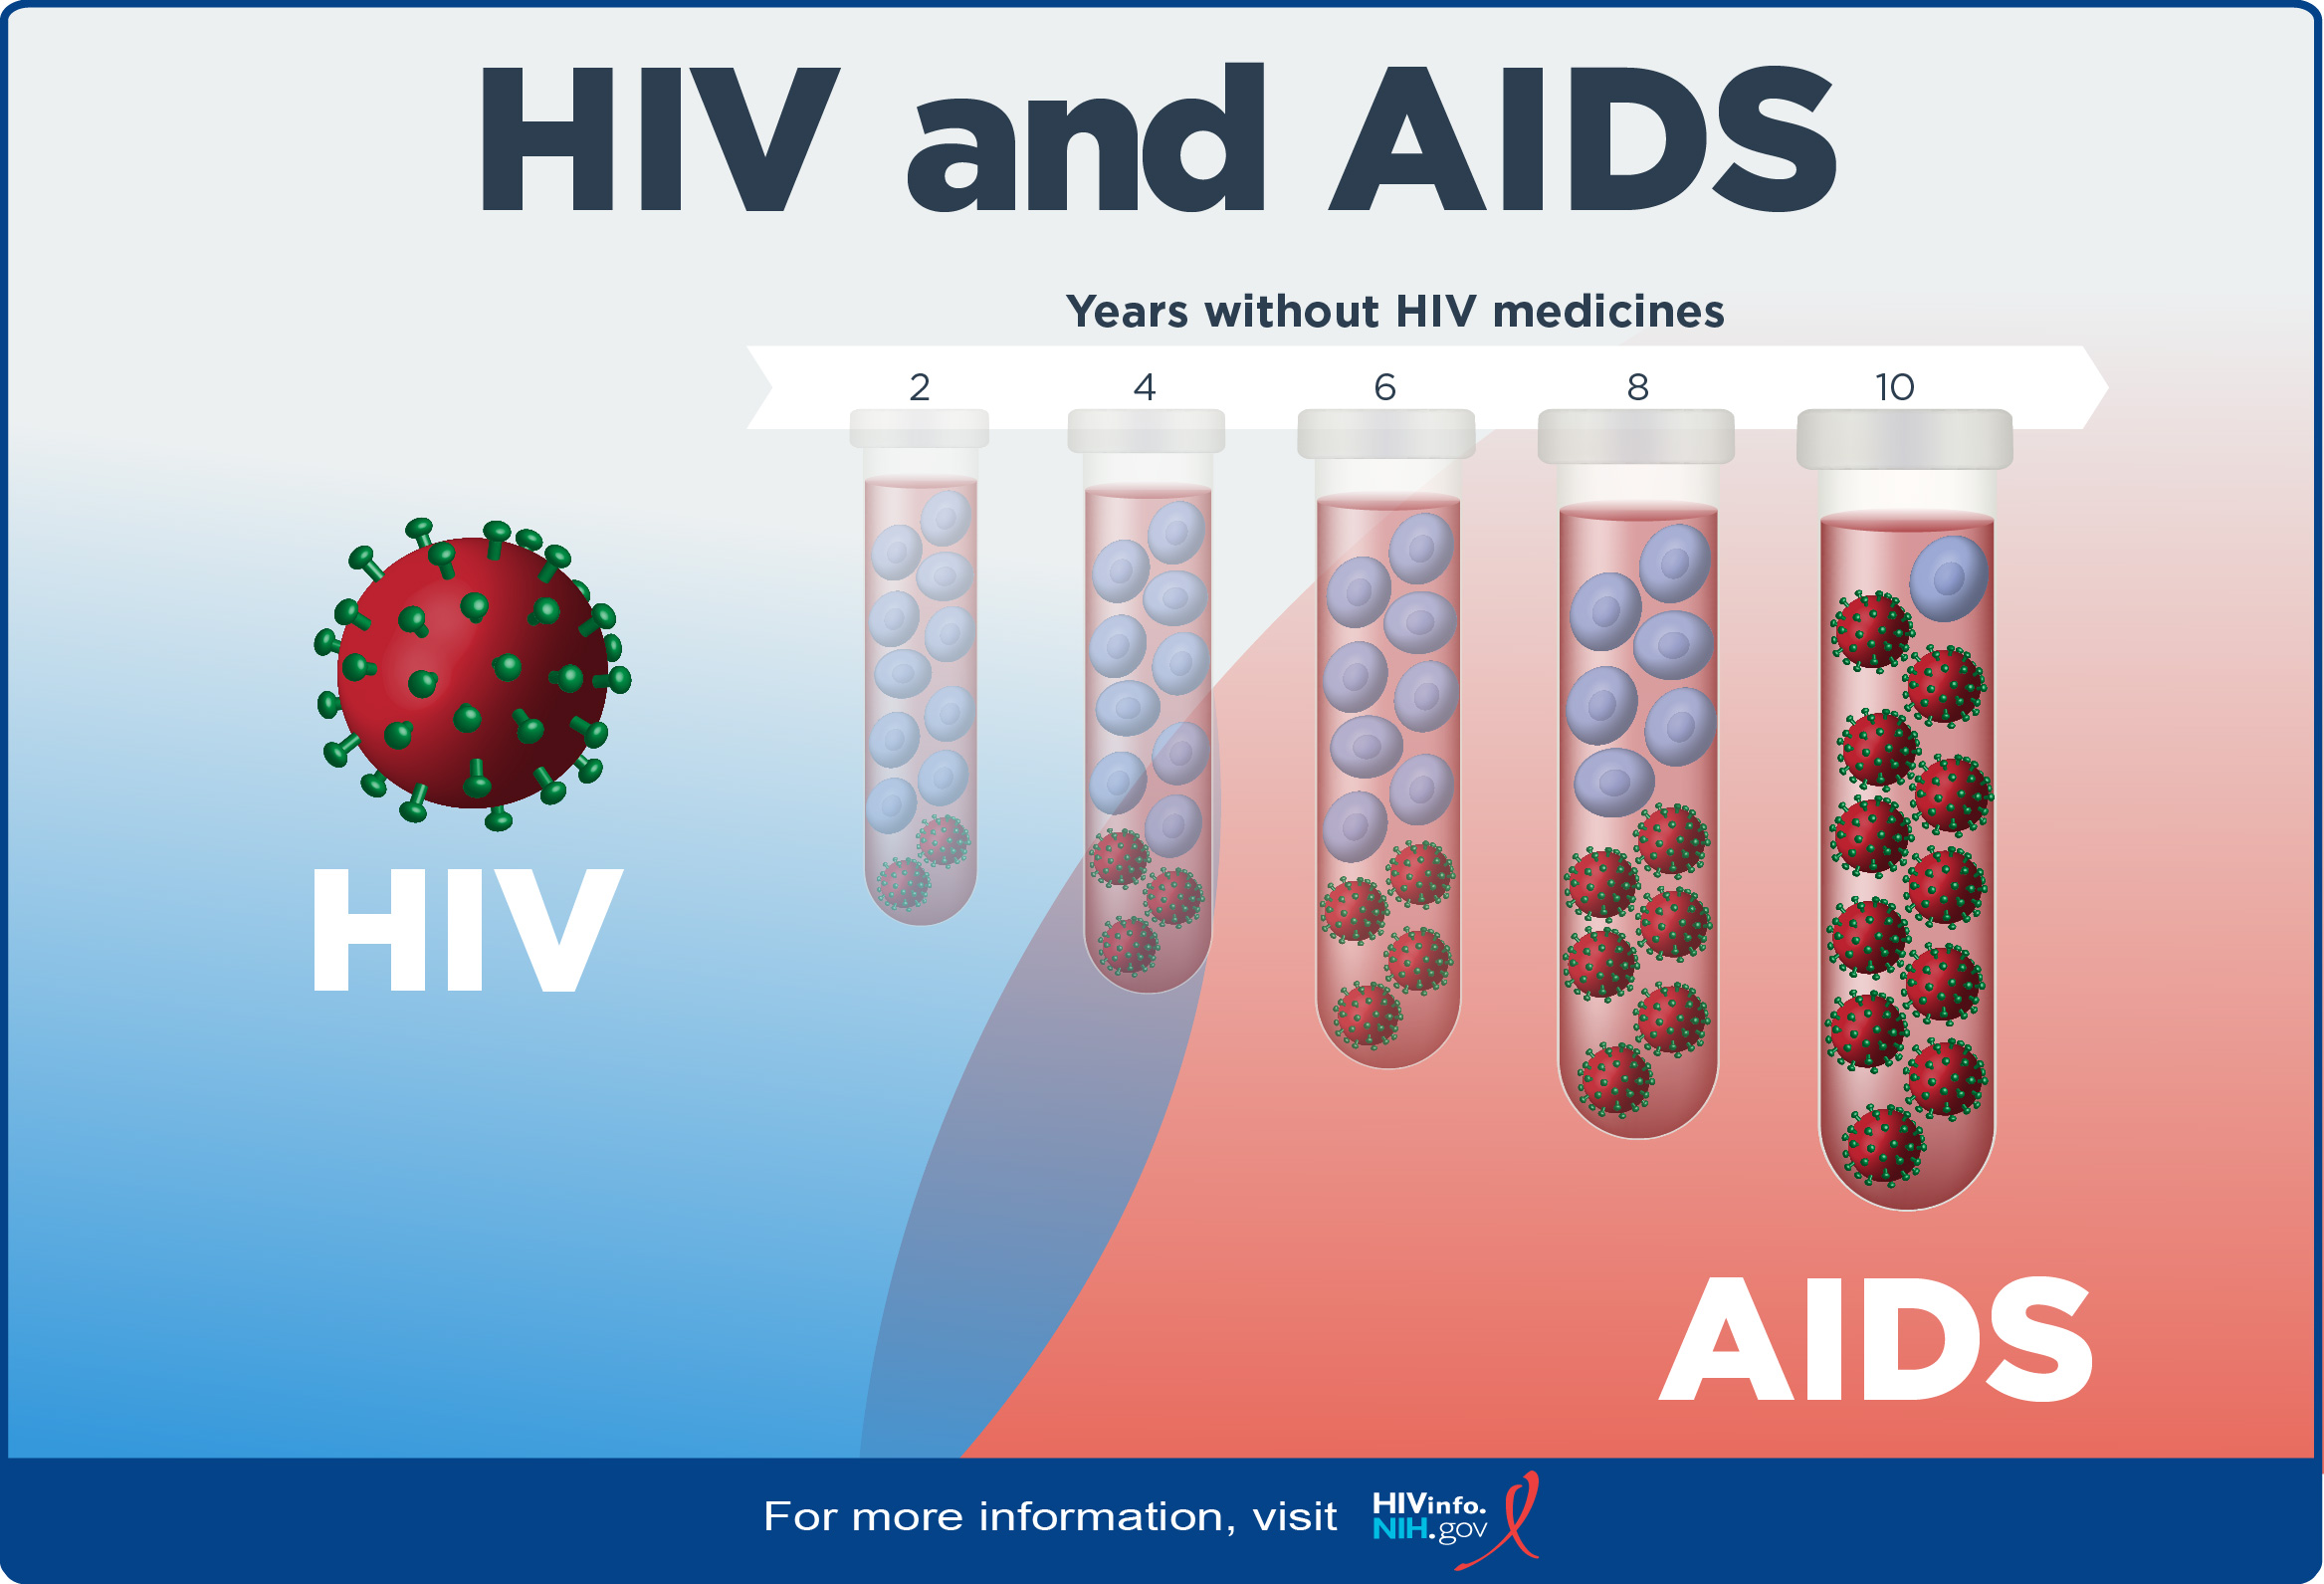 Human immunodeficiency virus. HIV AIDS. Картинки AIDS. AIDS вирус. AIDS and HIV different.